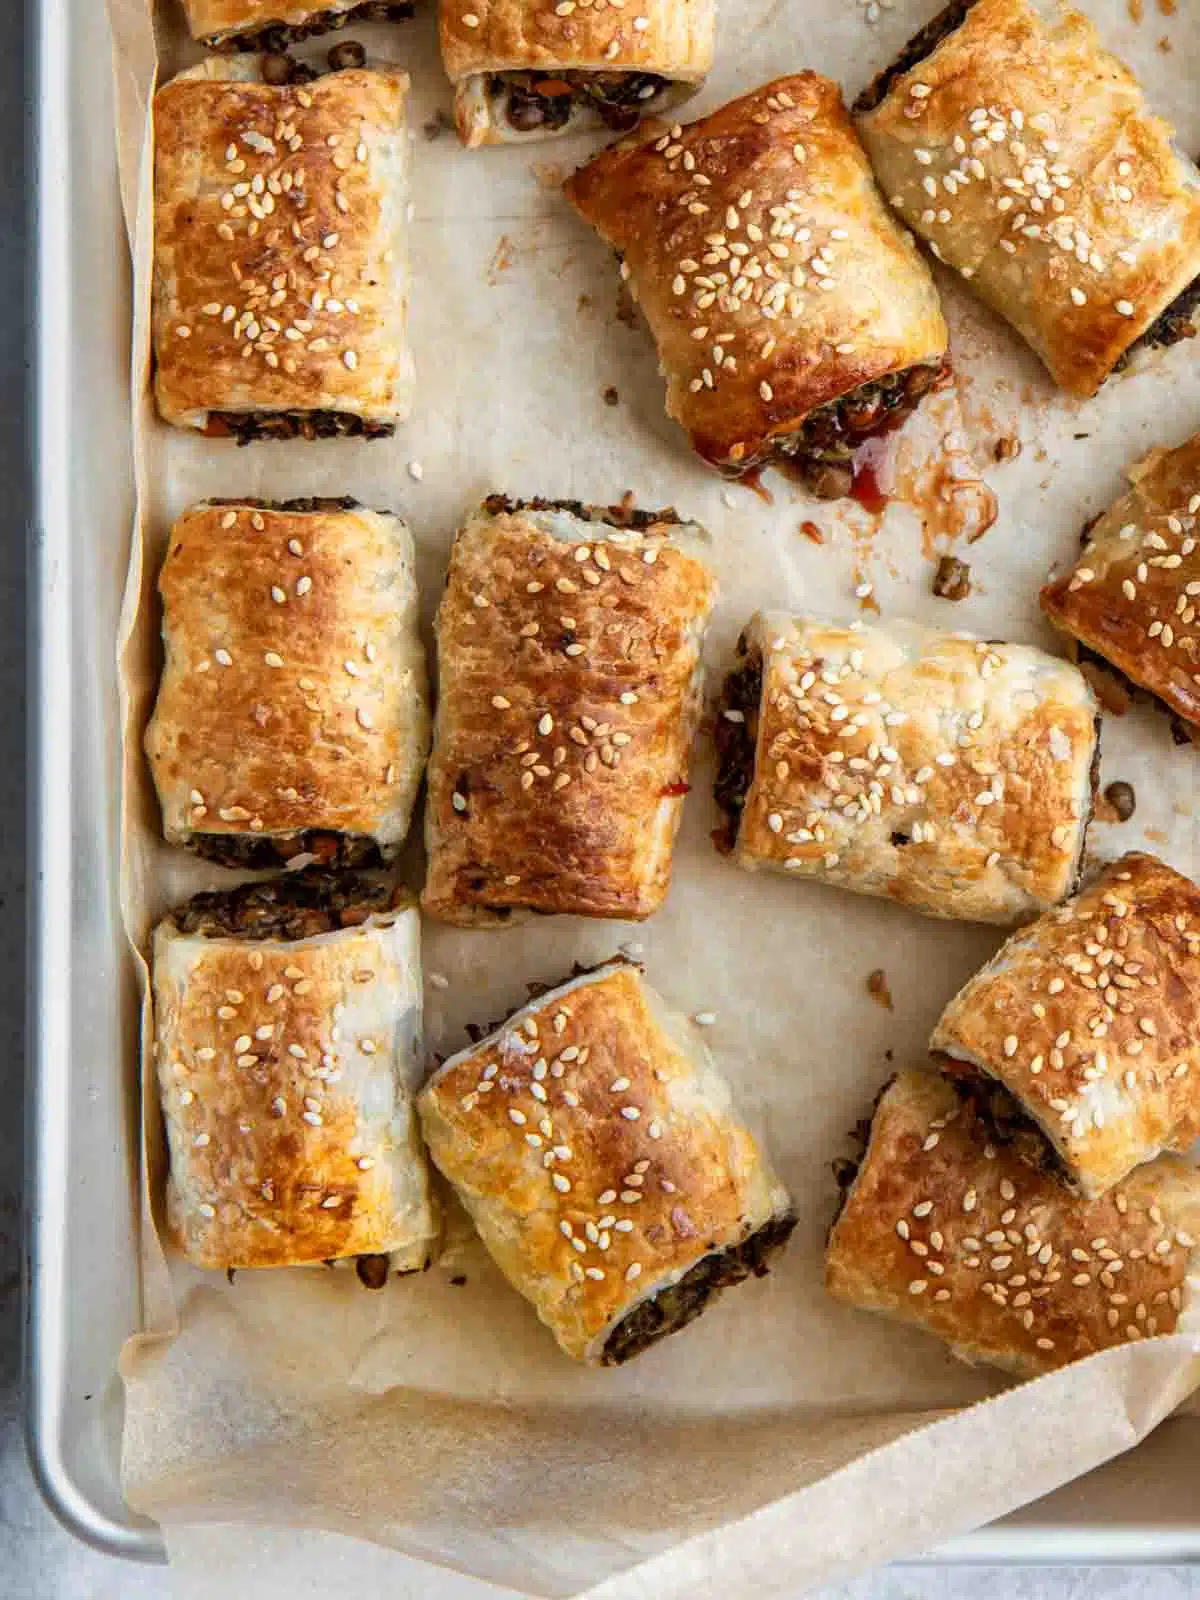 Sausage rolls on a baking tray.